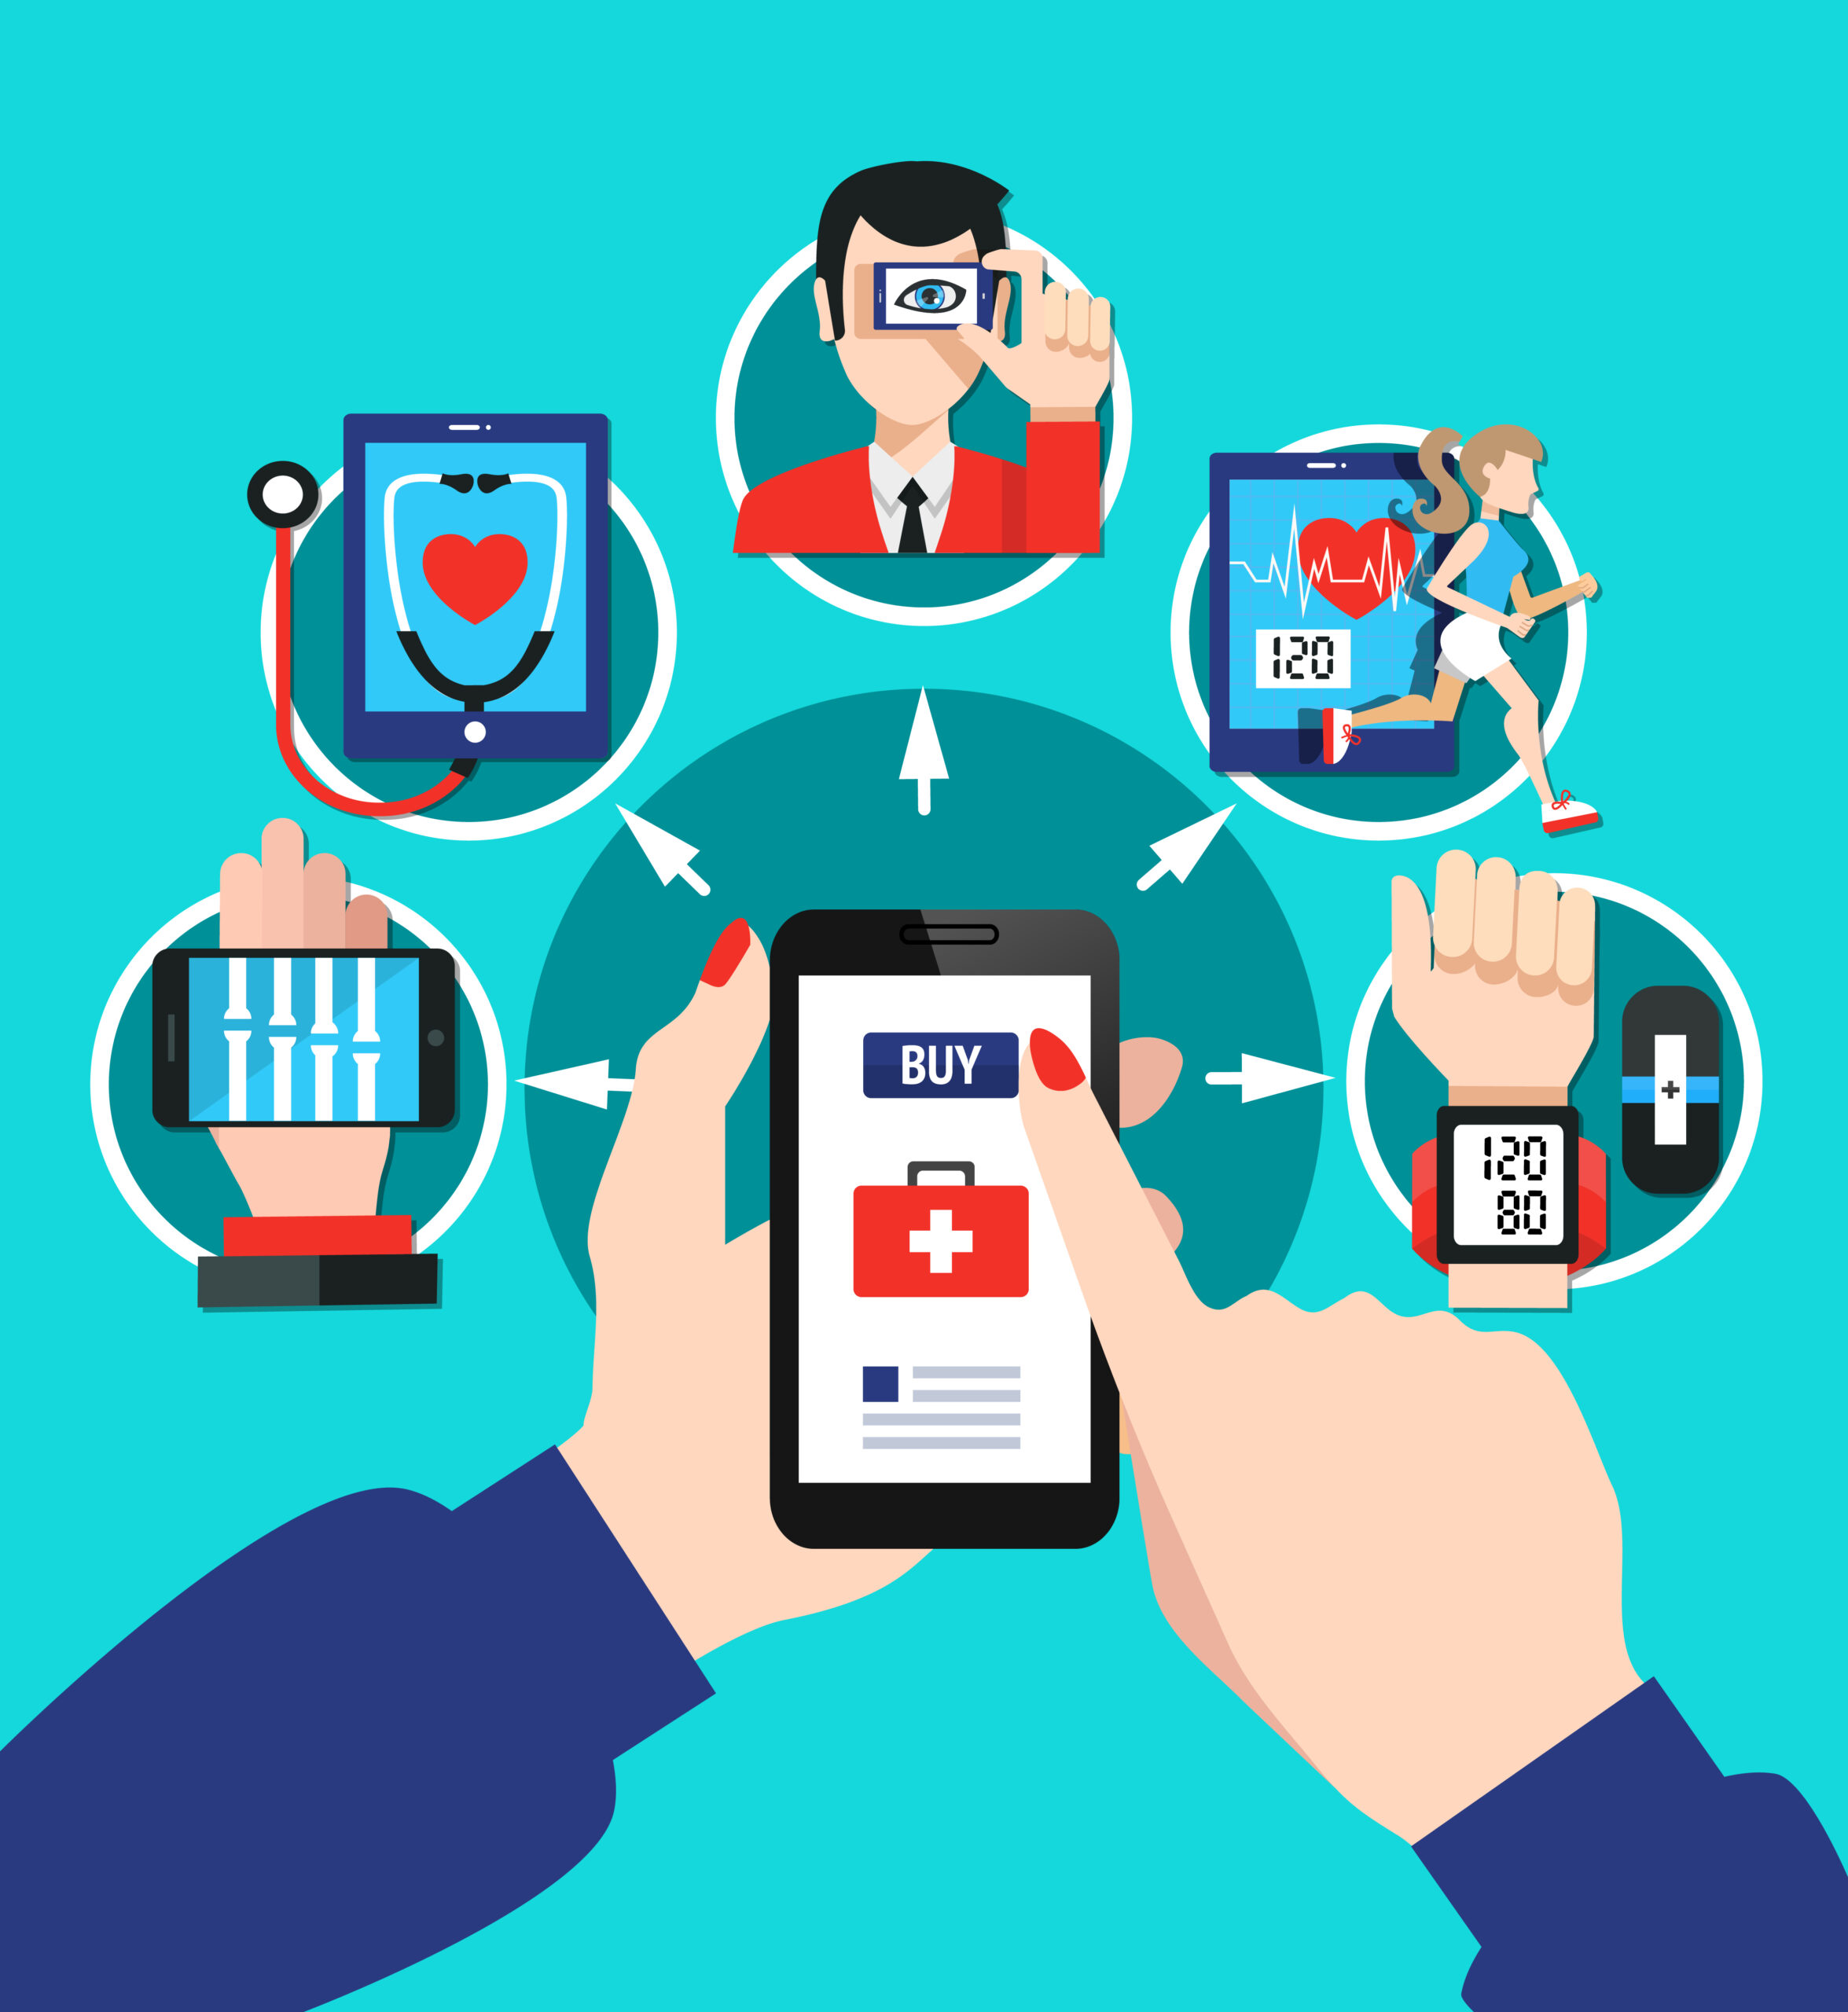 Streamlined payments simplify healthcare for all.